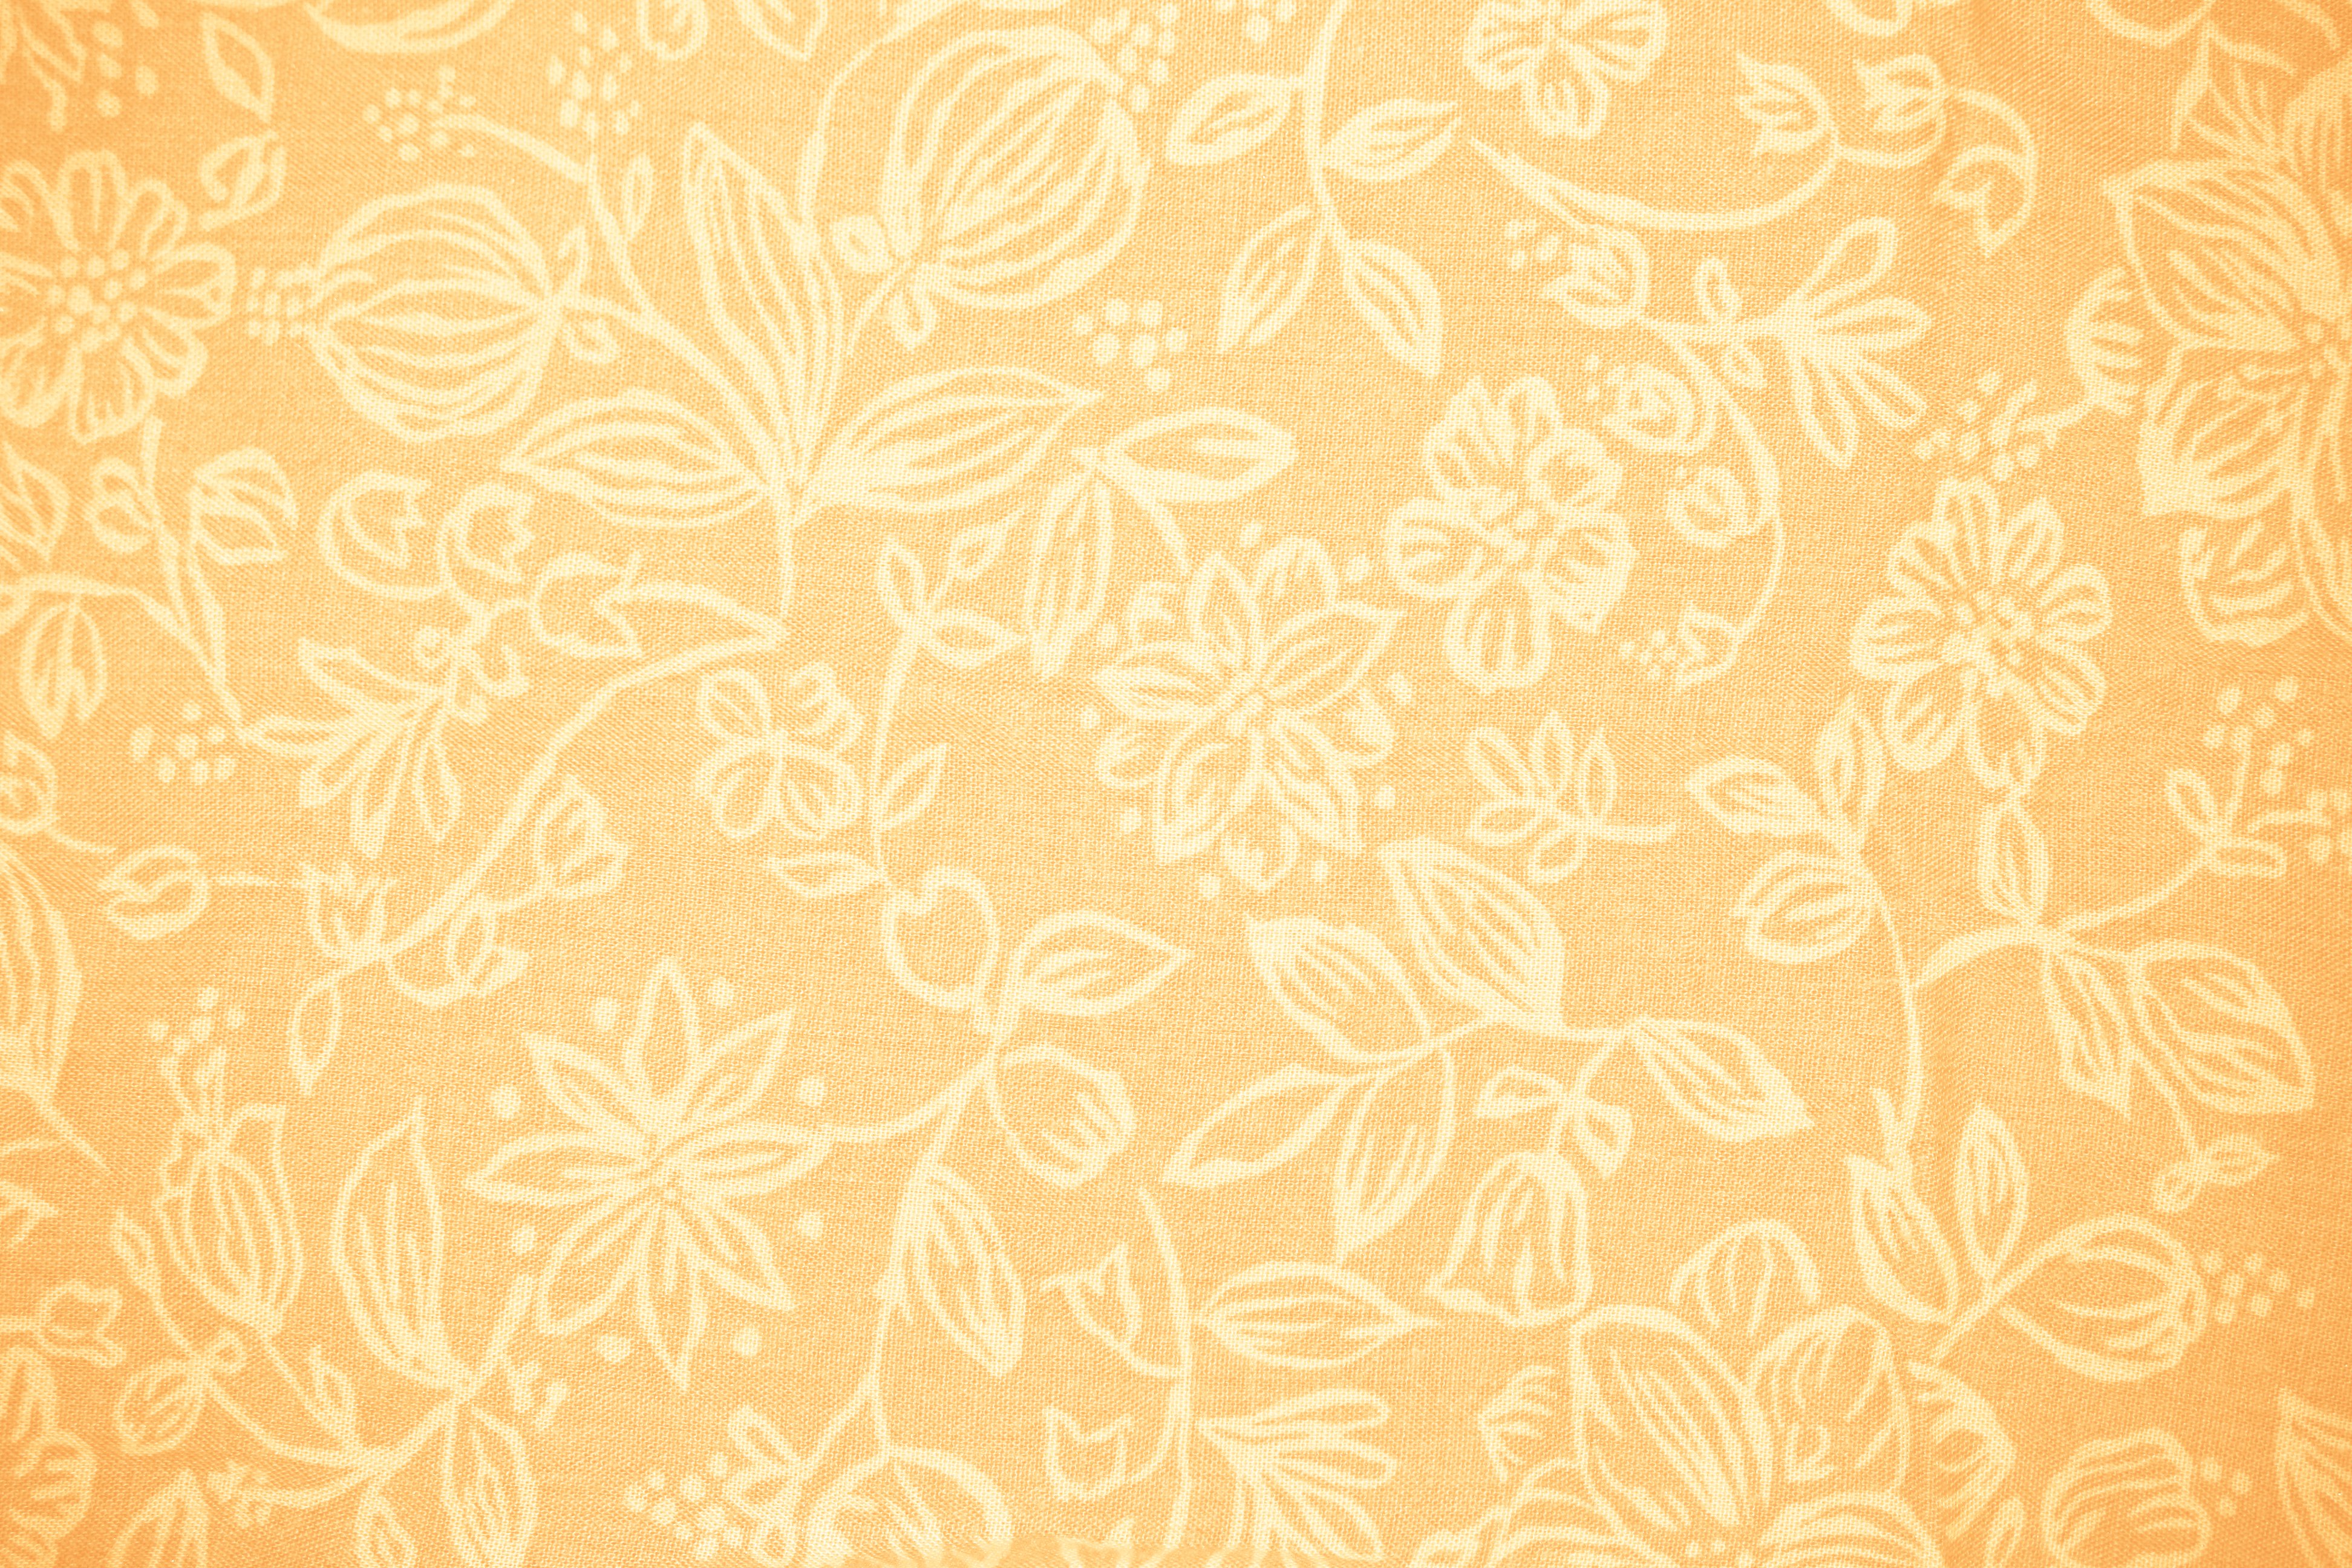 Peach Colored Fabric With Floral Pattern Texture Picture